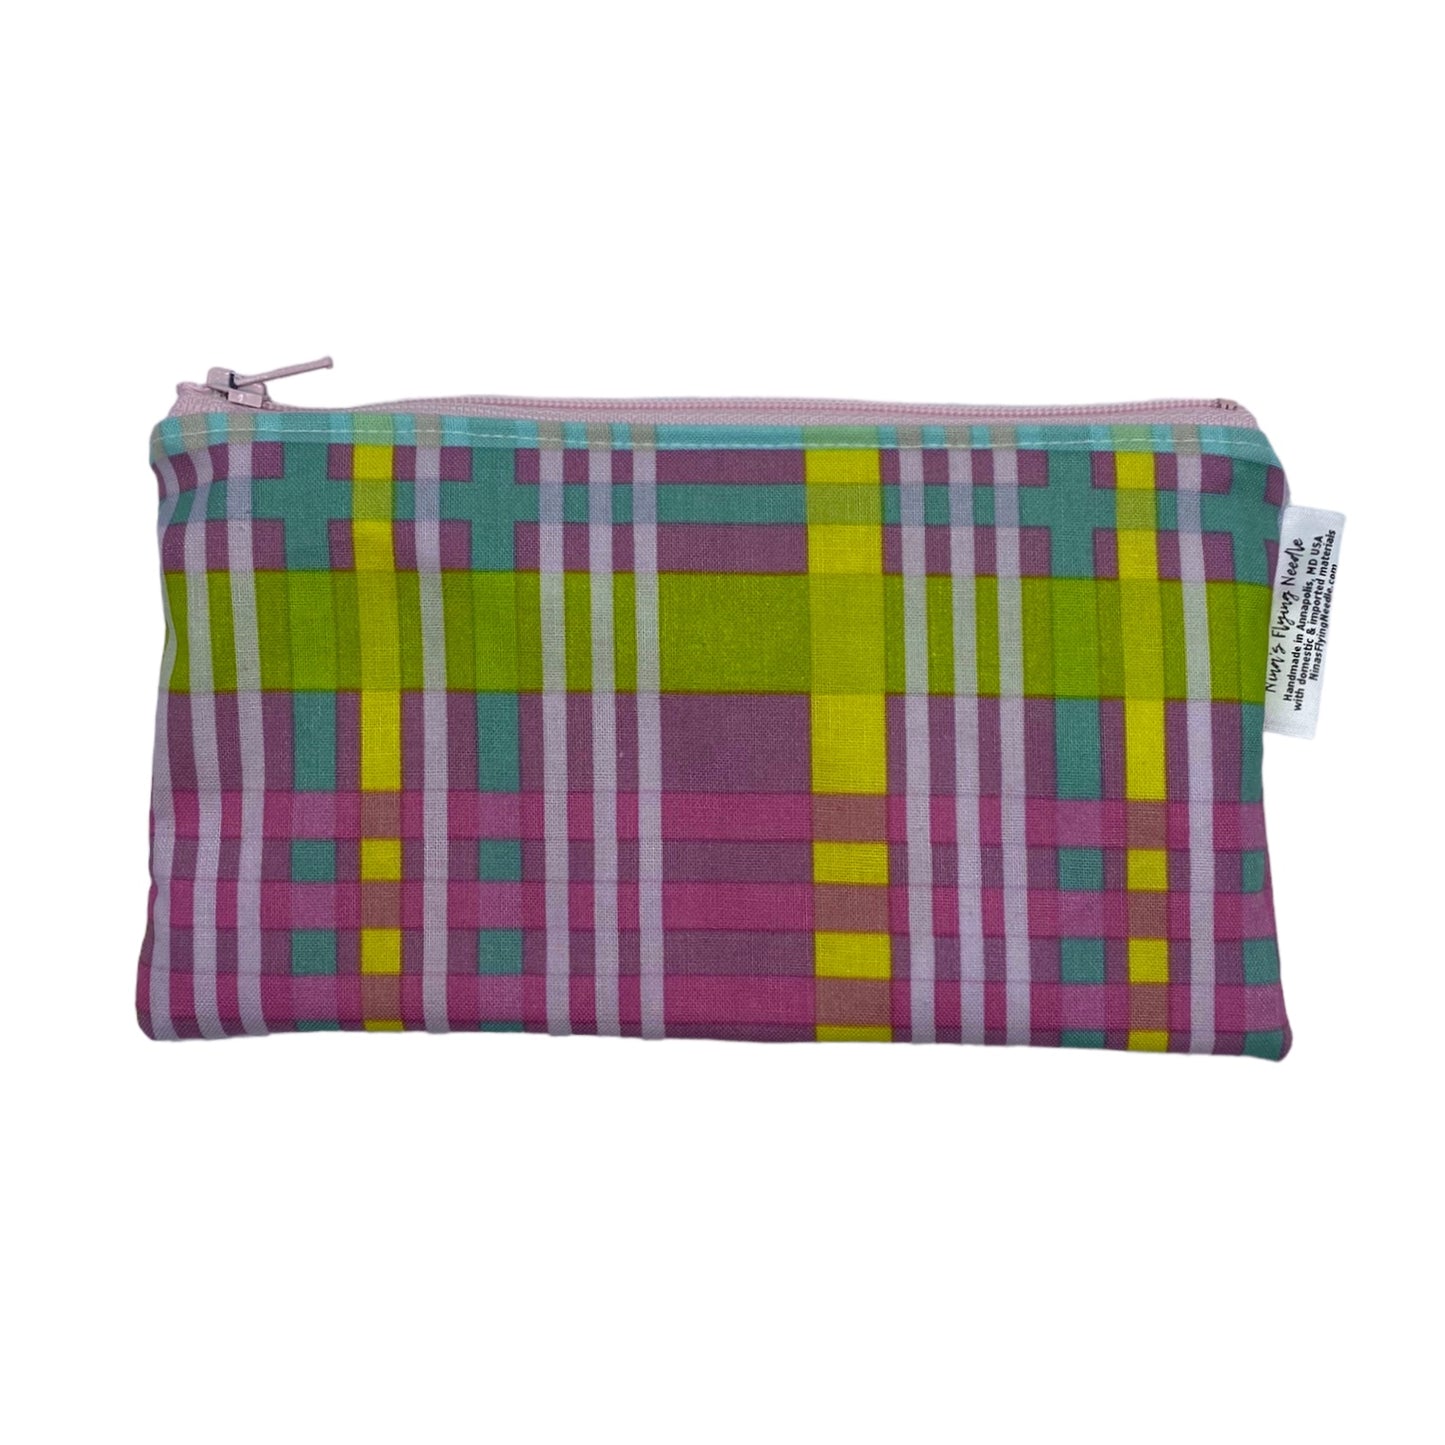 Knick Knack Sized Reusable Zippered Bag Gingham Plaid Blue Green Pink Yellow